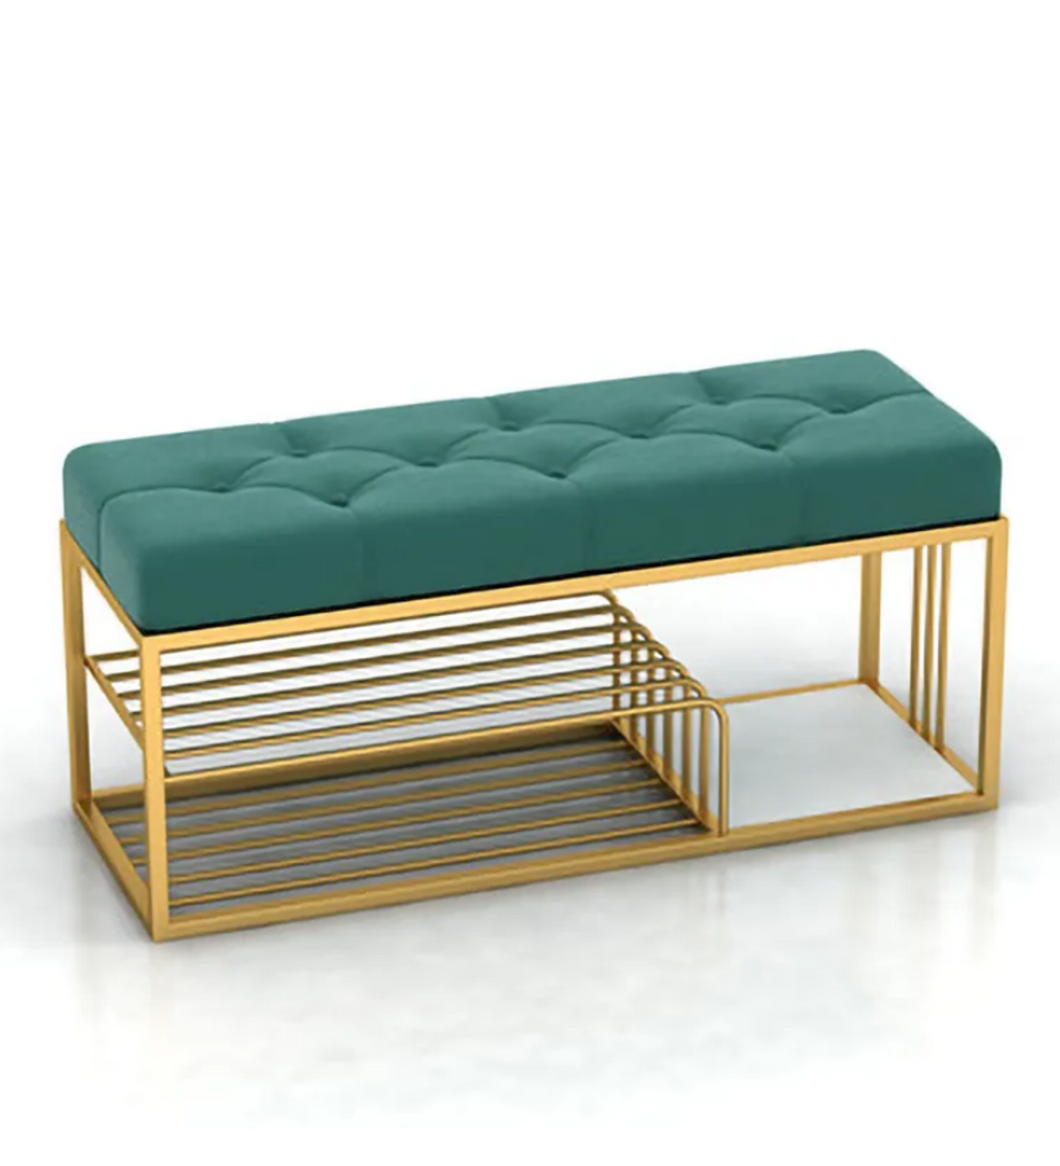 UNIQUE ENTRYWAY UPHOLSTERED BENCH WITH SHOE RACK